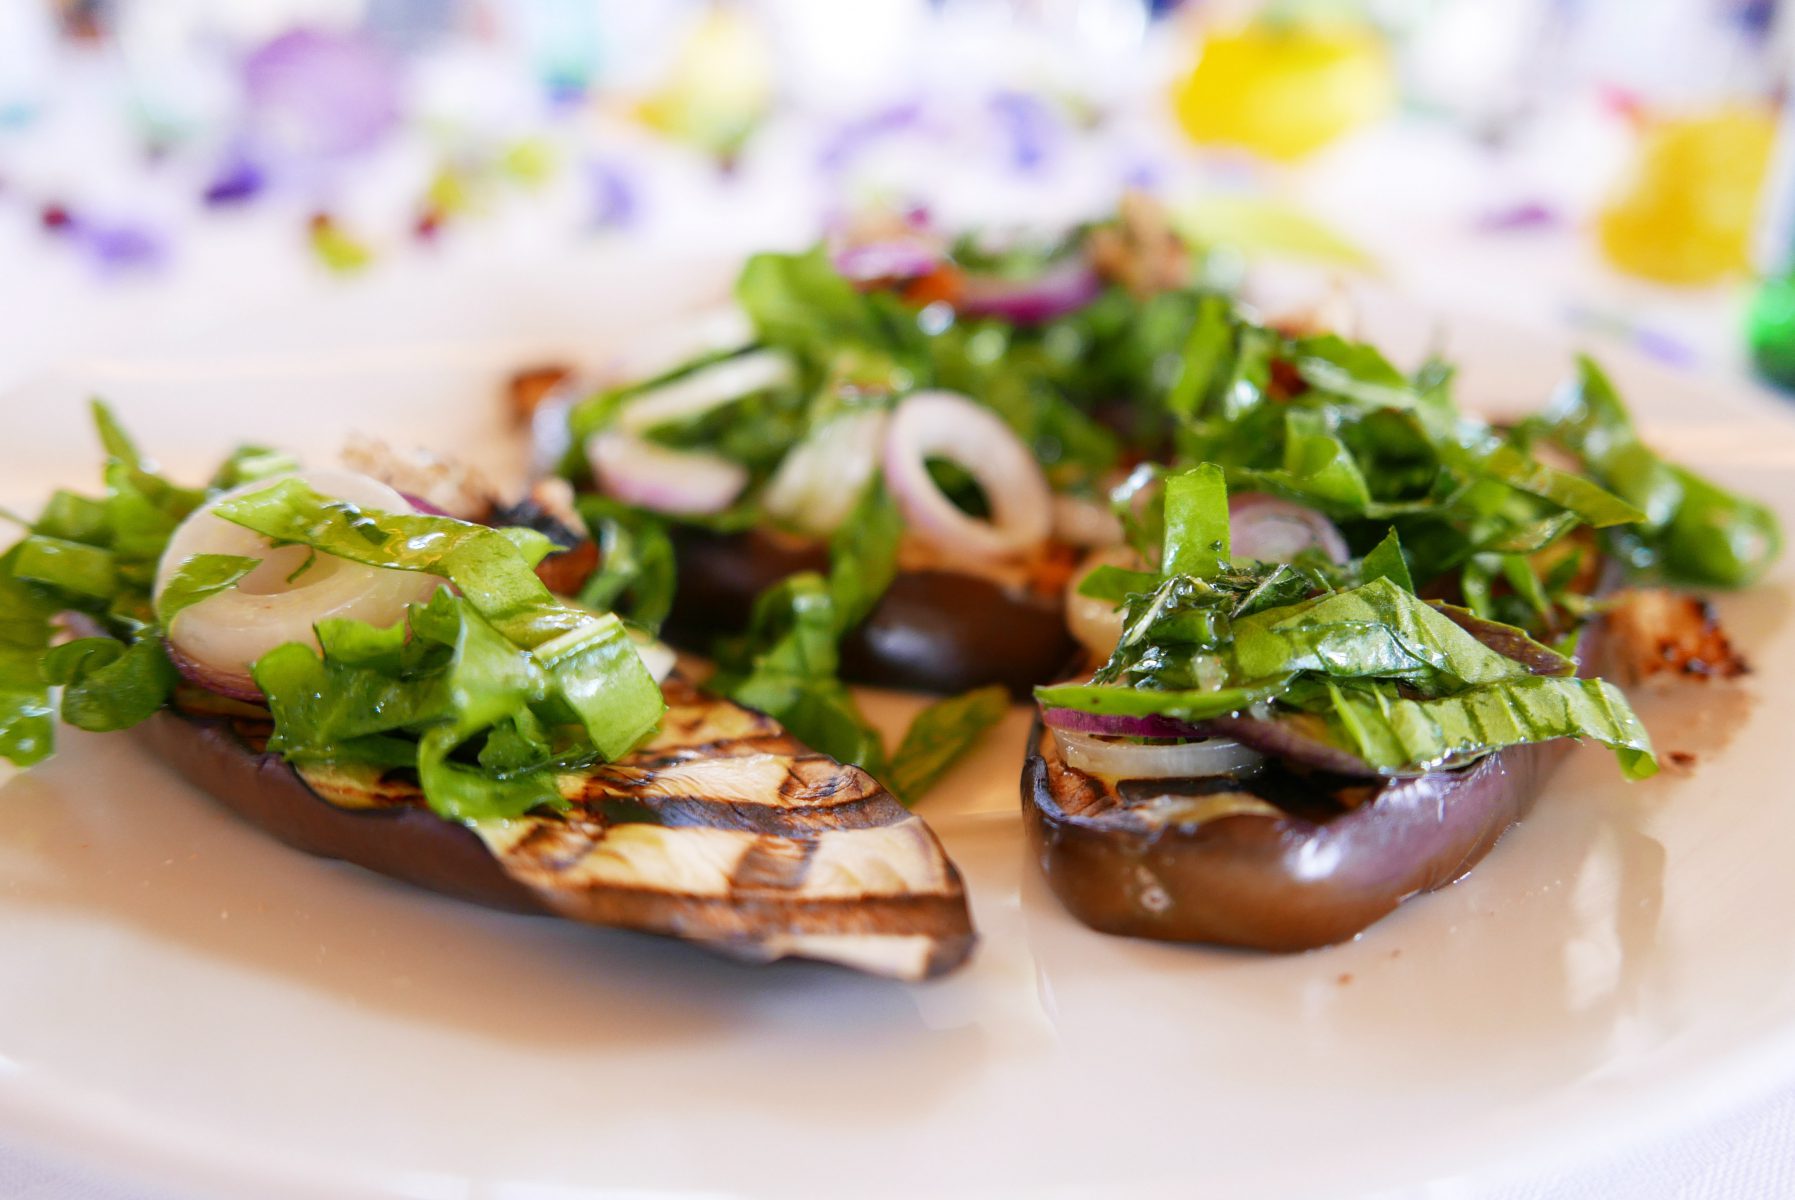 Grilled eggplant with mint, red basil and onion